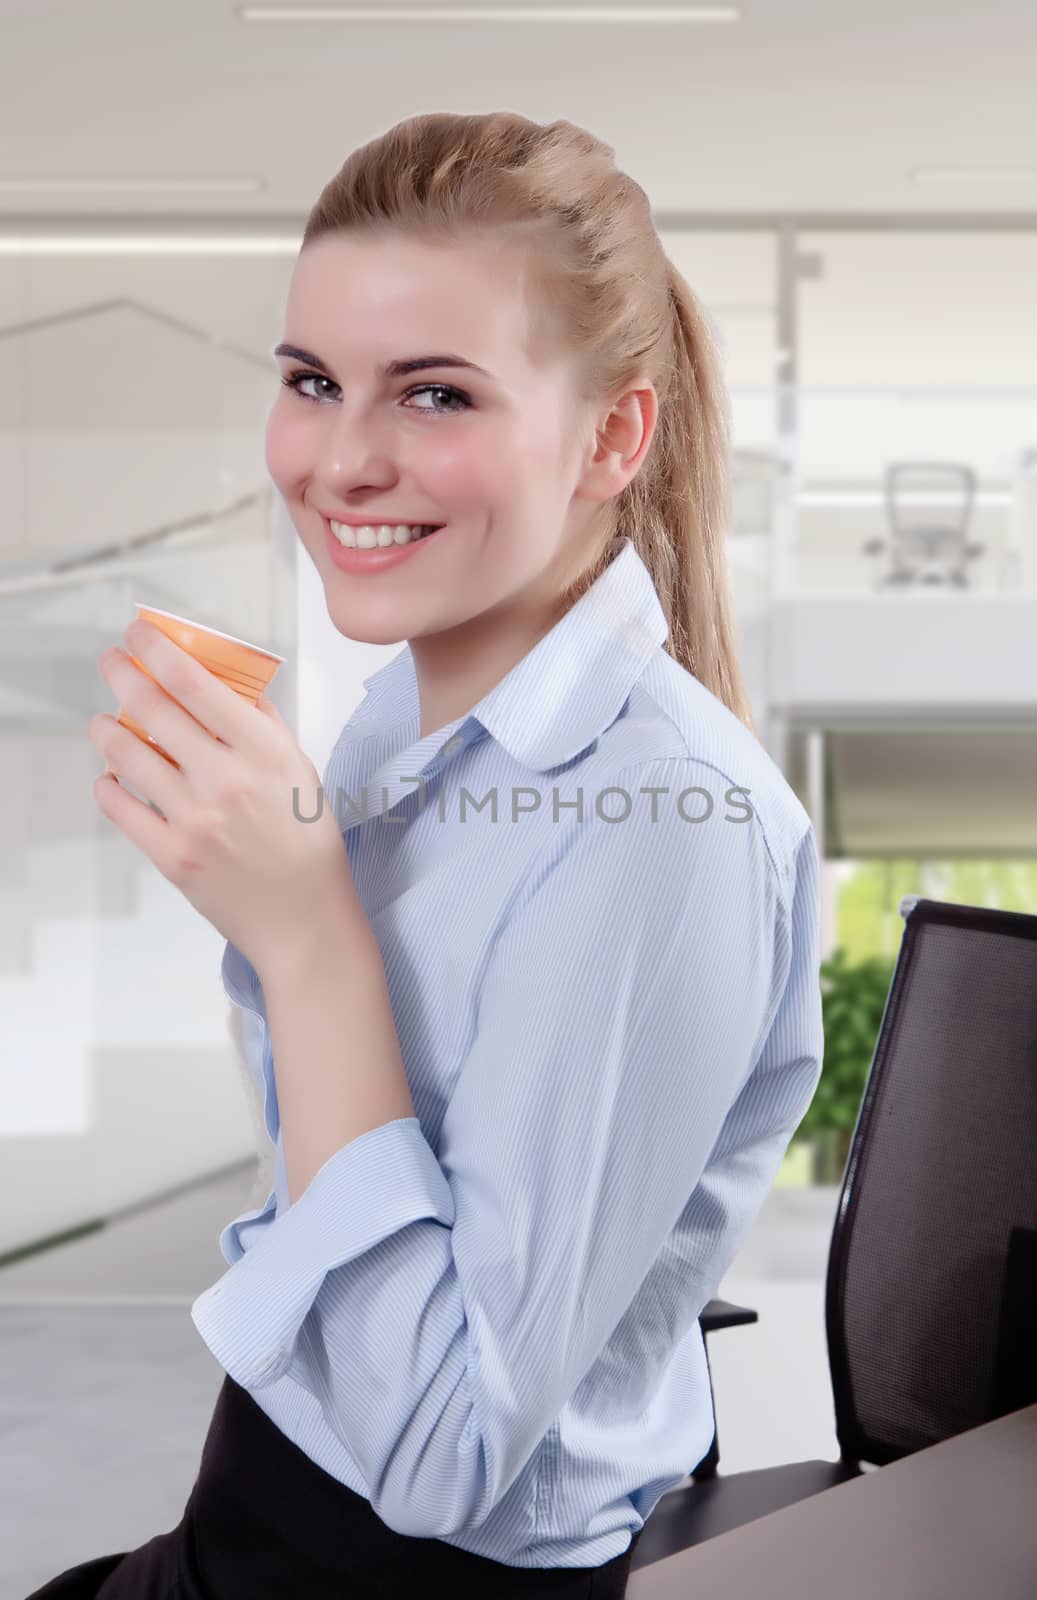 Beautiful Blond Young Businesswoman in Office with Coffee by matteobragaglio